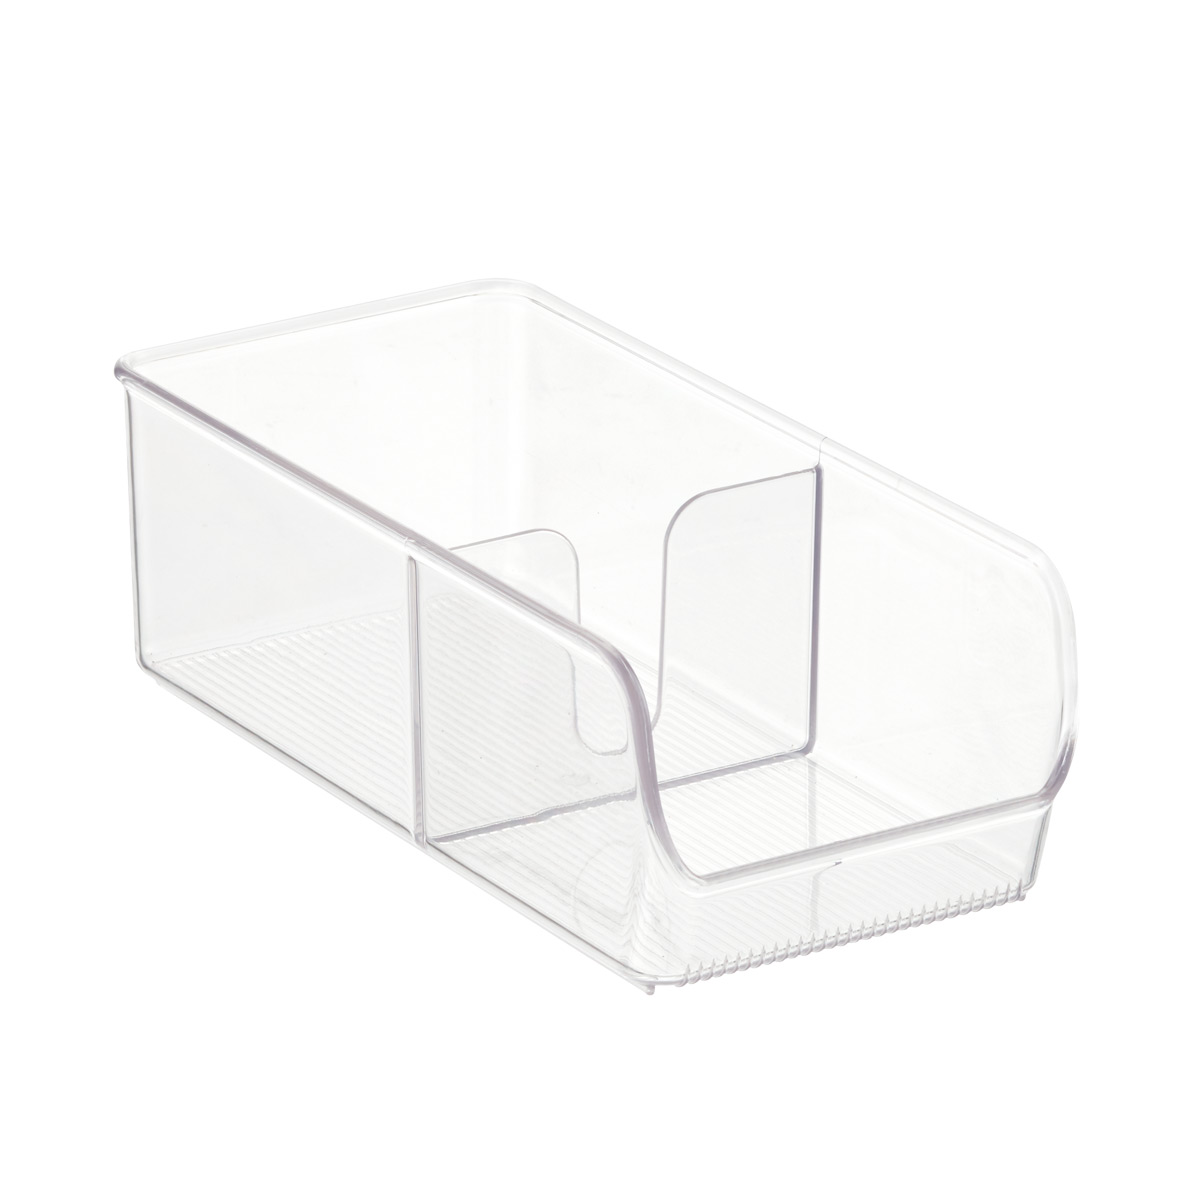 https://images.containerstore.com/catalogimages?sku=10048909